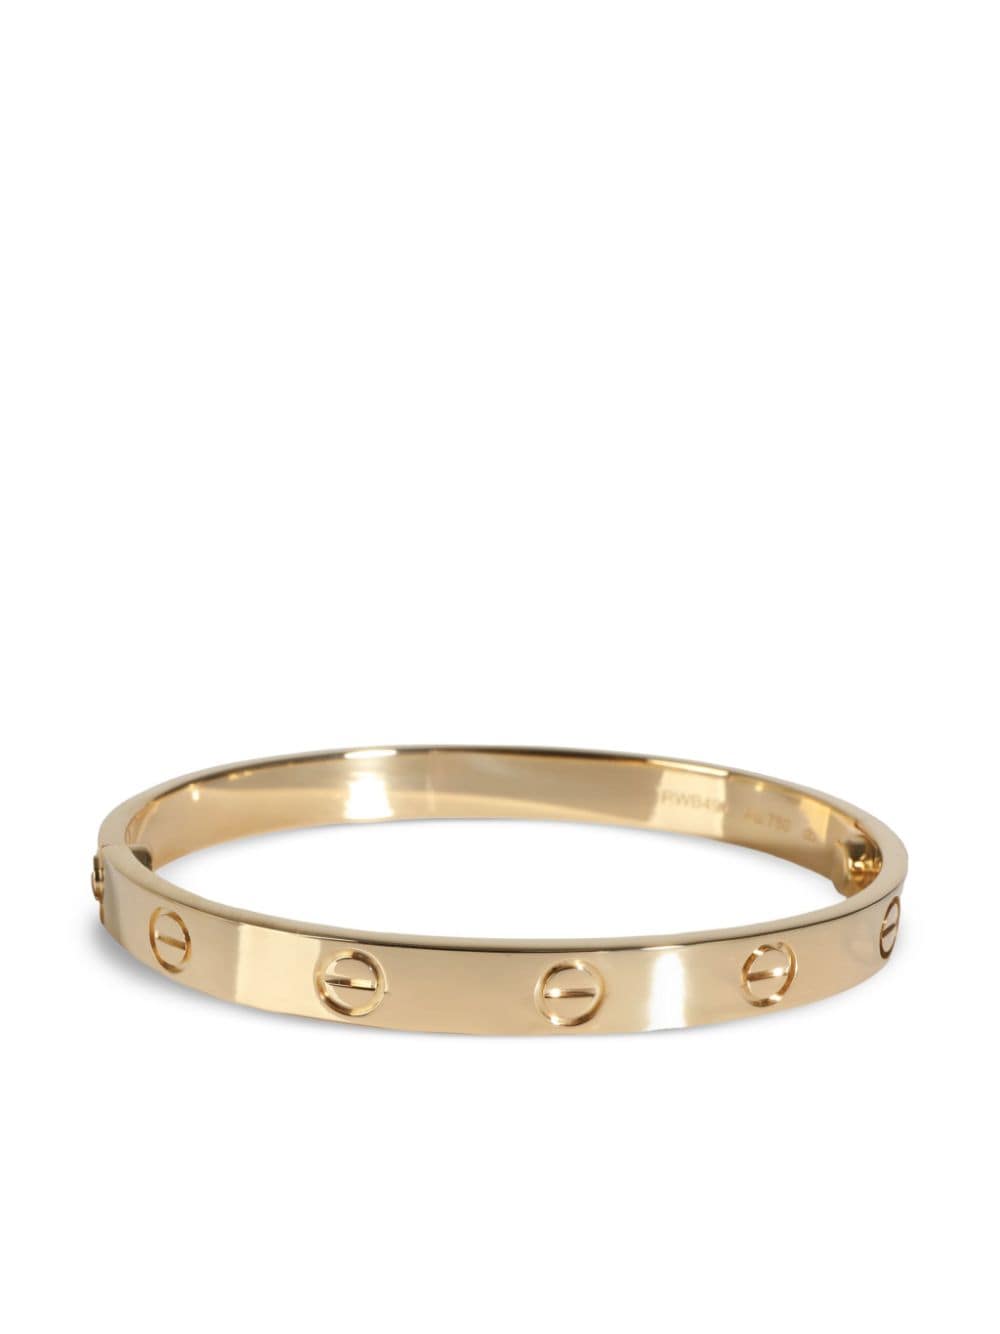 Pre-owned Cartier  18kt Yellow Gold Love Bracelet